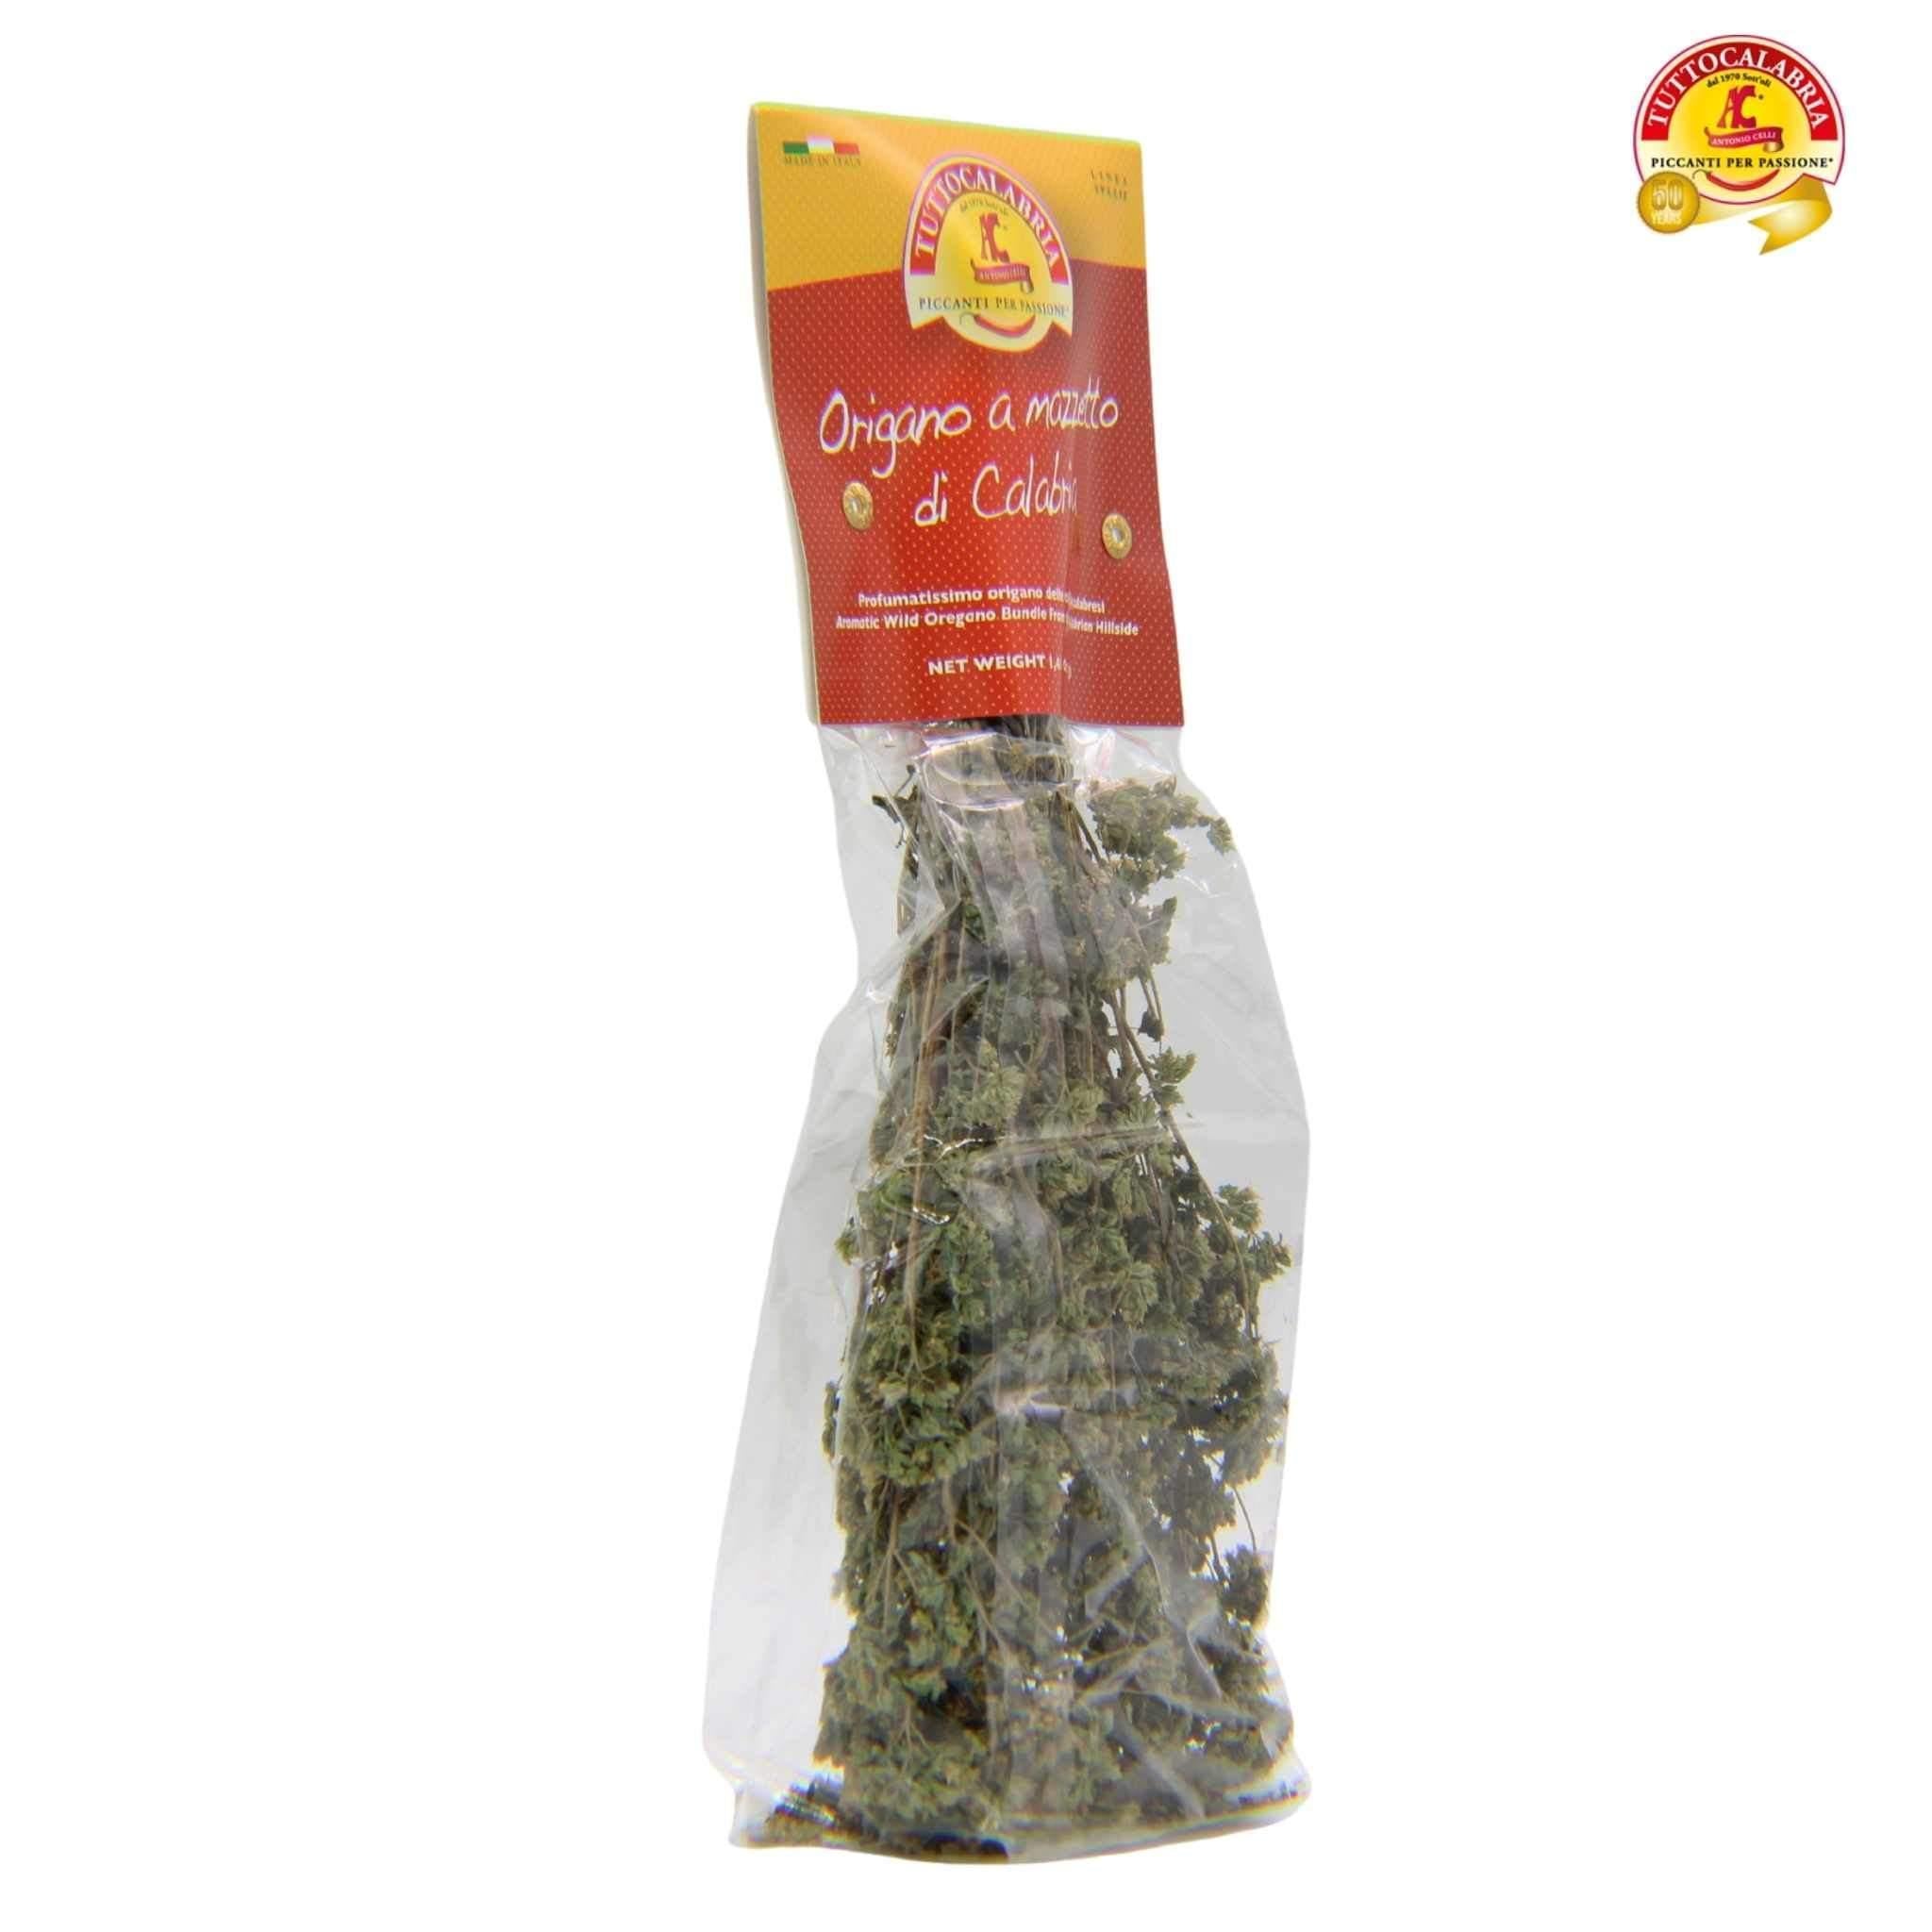 Dried Calabrian Oregano on Stem by TuttoCalabria (1 Pack x 40 g) - Wholesale Italian Food